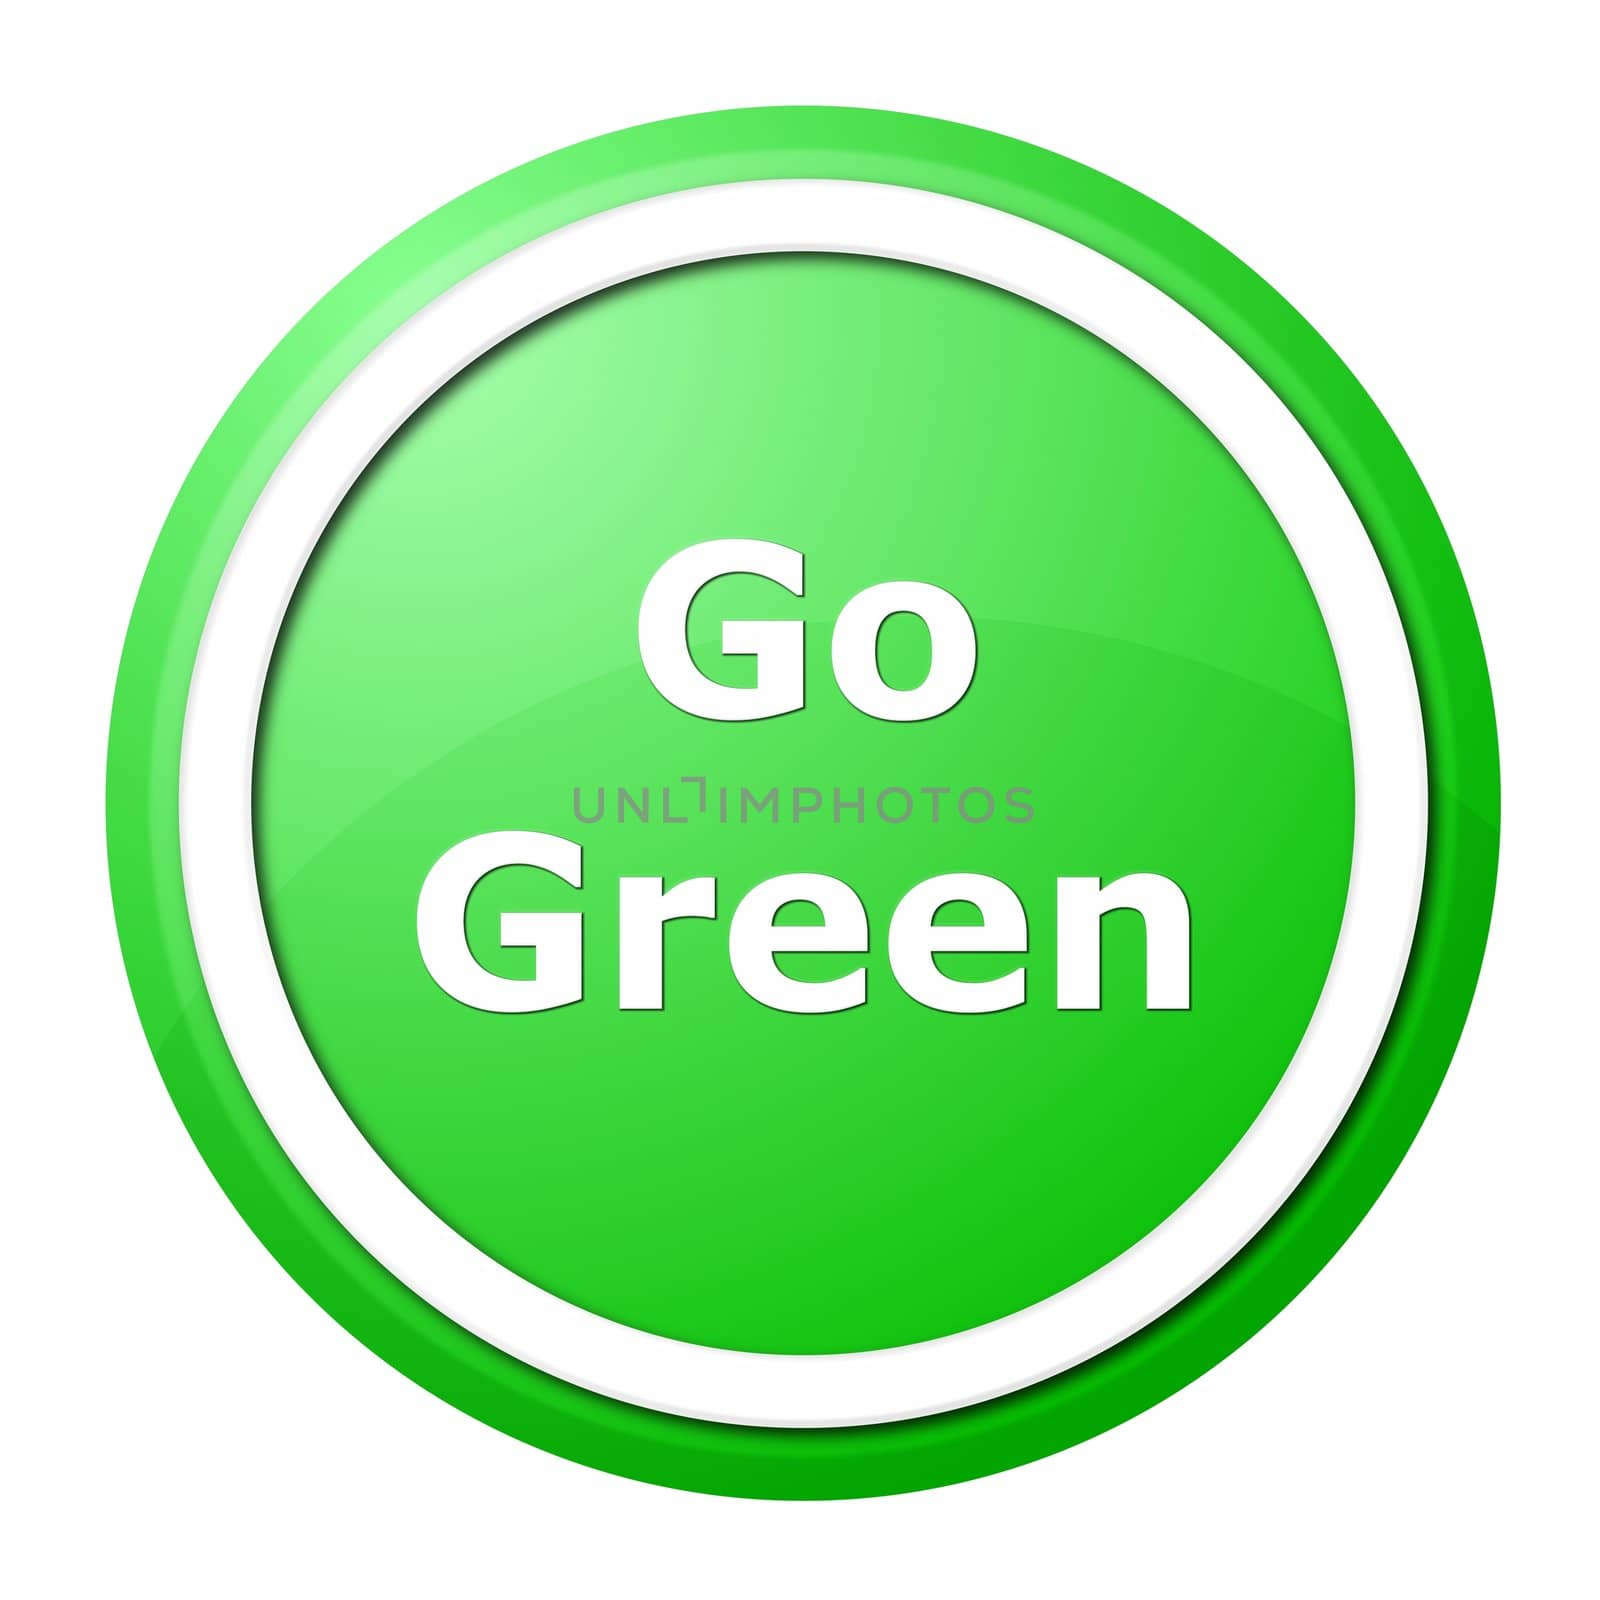 Go Green good for the environment and earth